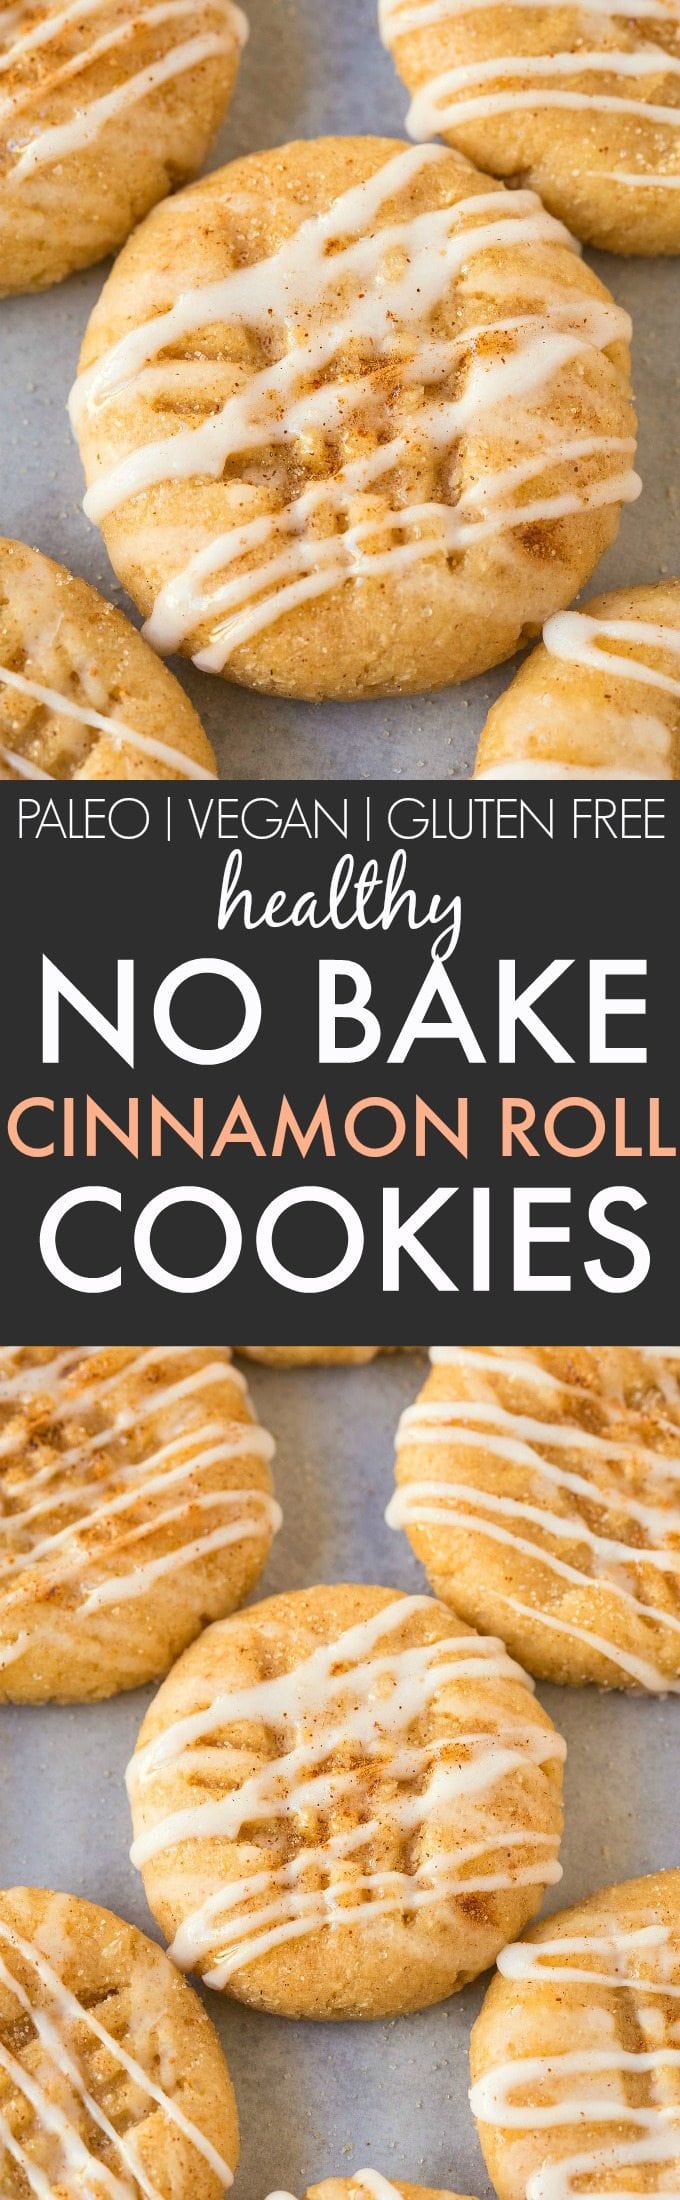 No Bake Cinnamon Roll Cookies (V, GF, Paleo)- Secretly HEALTHY no bake cookies LOADED with cinnamon flavor but made in one bowl and guilt-free! Refined sugar free and packed with protein! Perfect for Christmas, holidays, parties and events! {vegan, gluten free, paleo recipe}- thebigmansworld.com